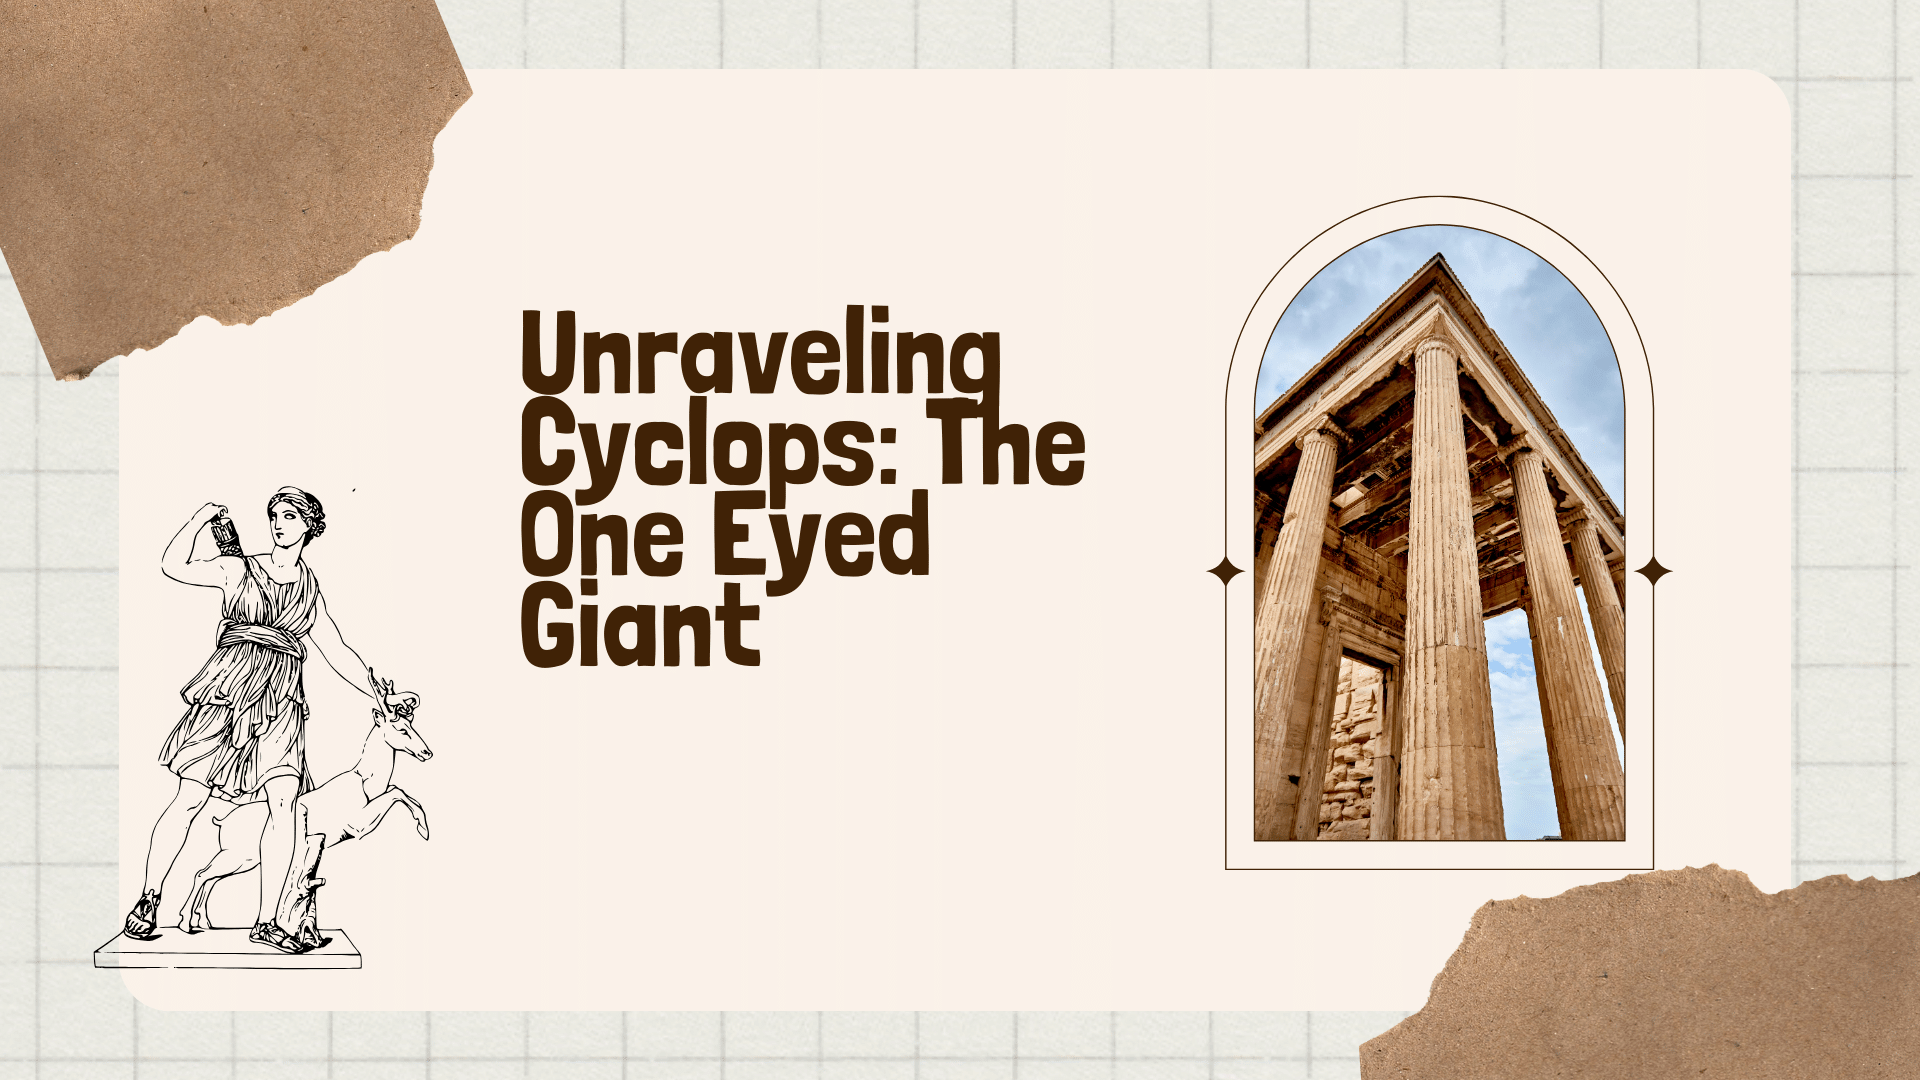 Unraveling Cyclops: The One Eyed Giant